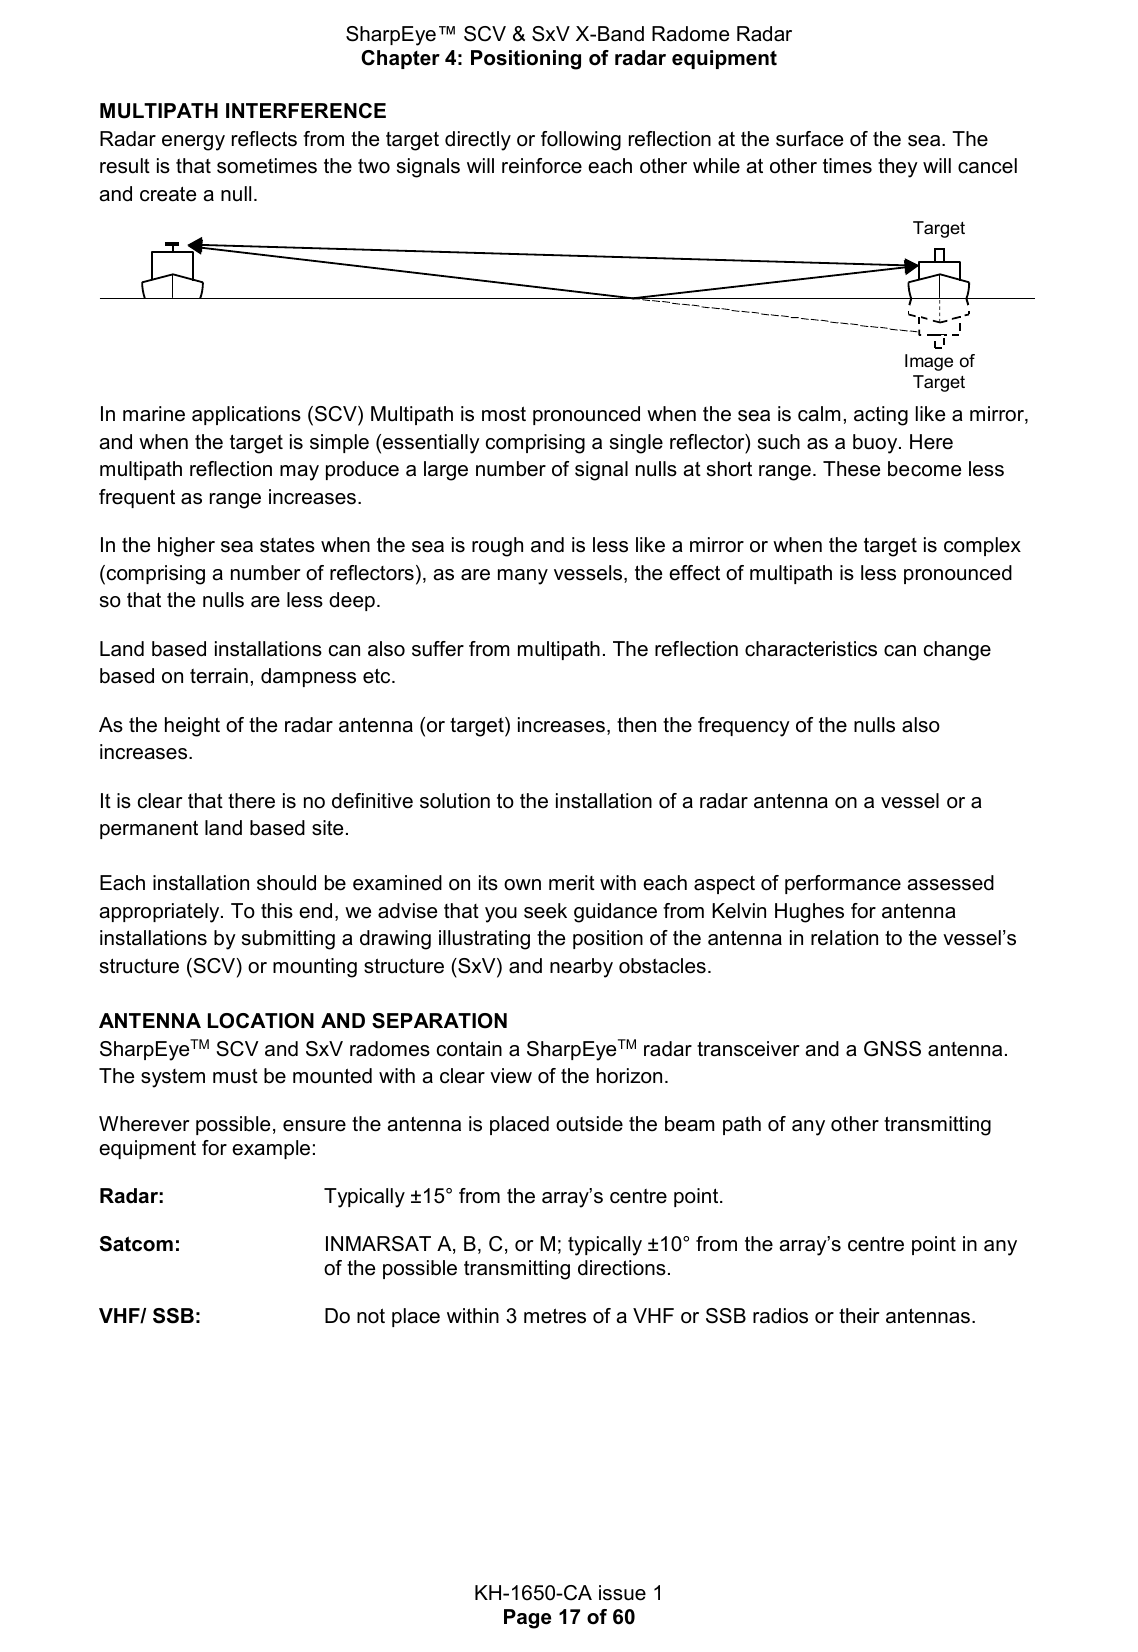 SharpEye™ SCV &amp; SxV X-Band Radome Radar Chapter 4: Positioning of radar equipment  KH-1650-CA issue 1 Page 17 of 60 MULTIPATH INTERFERENCE Radar energy reflects from the target directly or following reflection at the surface of the sea. The result is that sometimes the two signals will reinforce each other while at other times they will cancel and create a null.  In marine applications (SCV) Multipath is most pronounced when the sea is calm, acting like a mirror, and when the target is simple (essentially comprising a single reflector) such as a buoy. Here multipath reflection may produce a large number of signal nulls at short range. These become less frequent as range increases.  In the higher sea states when the sea is rough and is less like a mirror or when the target is complex (comprising a number of reflectors), as are many vessels, the effect of multipath is less pronounced so that the nulls are less deep. Land based installations can also suffer from multipath. The reflection characteristics can change based on terrain, dampness etc. As the height of the radar antenna (or target) increases, then the frequency of the nulls also increases.  It is clear that there is no definitive solution to the installation of a radar antenna on a vessel or a permanent land based site.  Each installation should be examined on its own merit with each aspect of performance assessed appropriately. To this end, we advise that you seek guidance from Kelvin Hughes for antenna installations by submitting a drawing illustrating the position of the antenna in relation to the vessel’s structure (SCV) or mounting structure (SxV) and nearby obstacles.  ANTENNA LOCATION AND SEPARATION SharpEyeTM SCV and SxV radomes contain a SharpEyeTM radar transceiver and a GNSS antenna. The system must be mounted with a clear view of the horizon.  Wherever possible, ensure the antenna is placed outside the beam path of any other transmitting equipment for example:  Radar:      Typically ±15° from the array’s centre point.  Satcom:   INMARSAT A, B, C, or M; typically ±10° from the array’s centre point in any of the possible transmitting directions.   VHF/ SSB:     Do not place within 3 metres of a VHF or SSB radios or their antennas.   Image ofTargetTarget